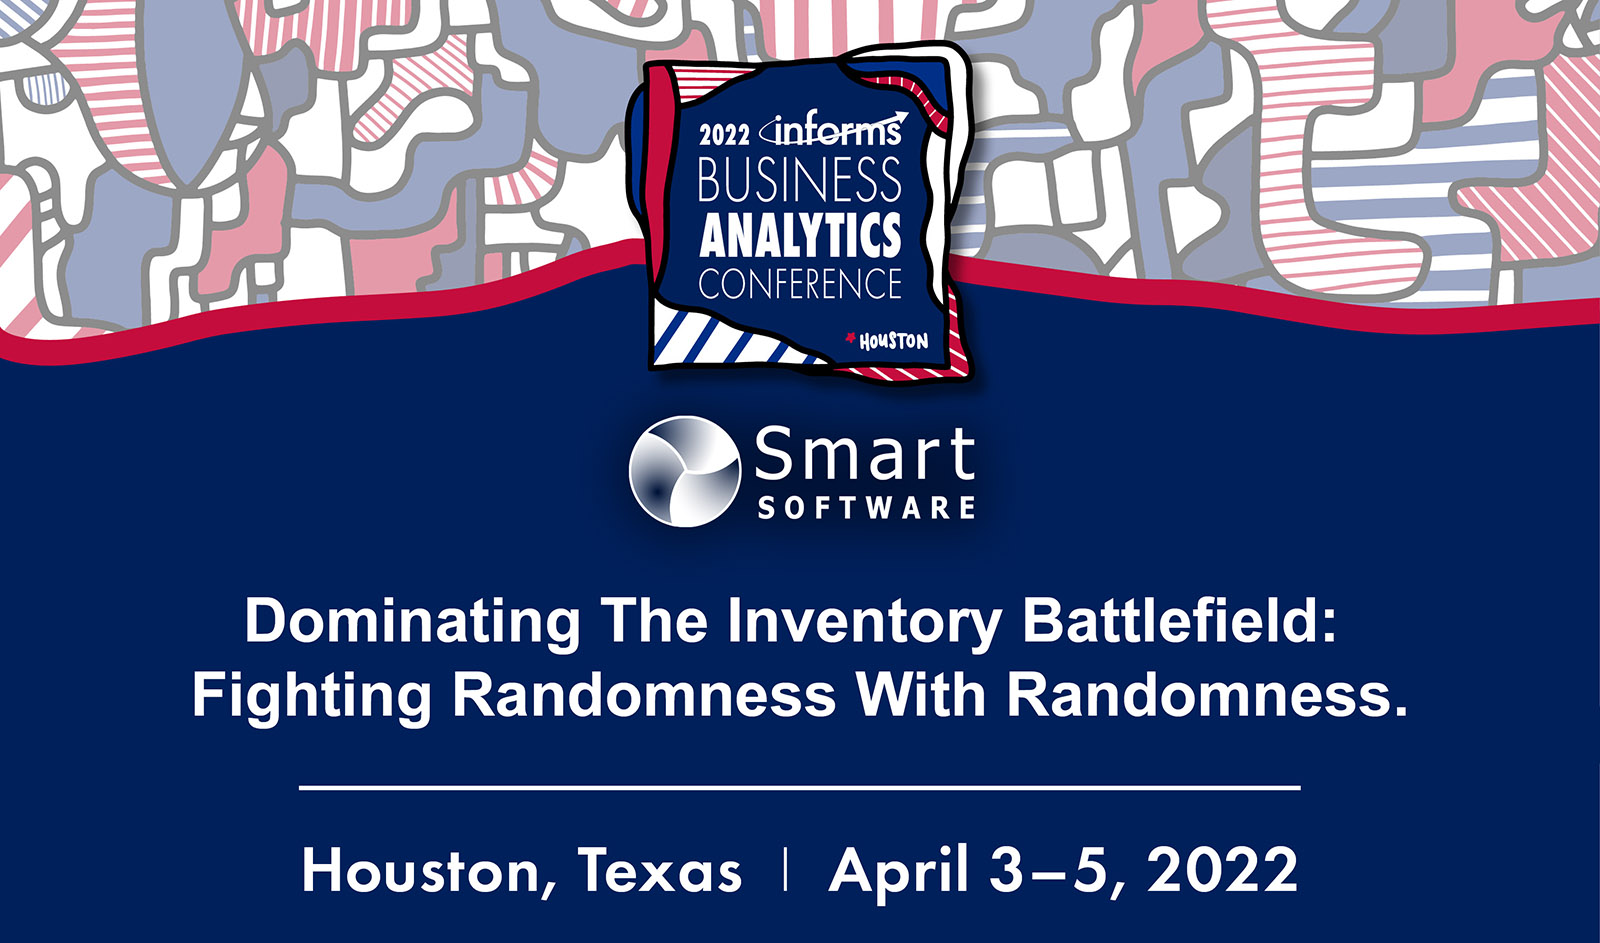 Smart Software to Present at INFORMS Business Analytics Conference